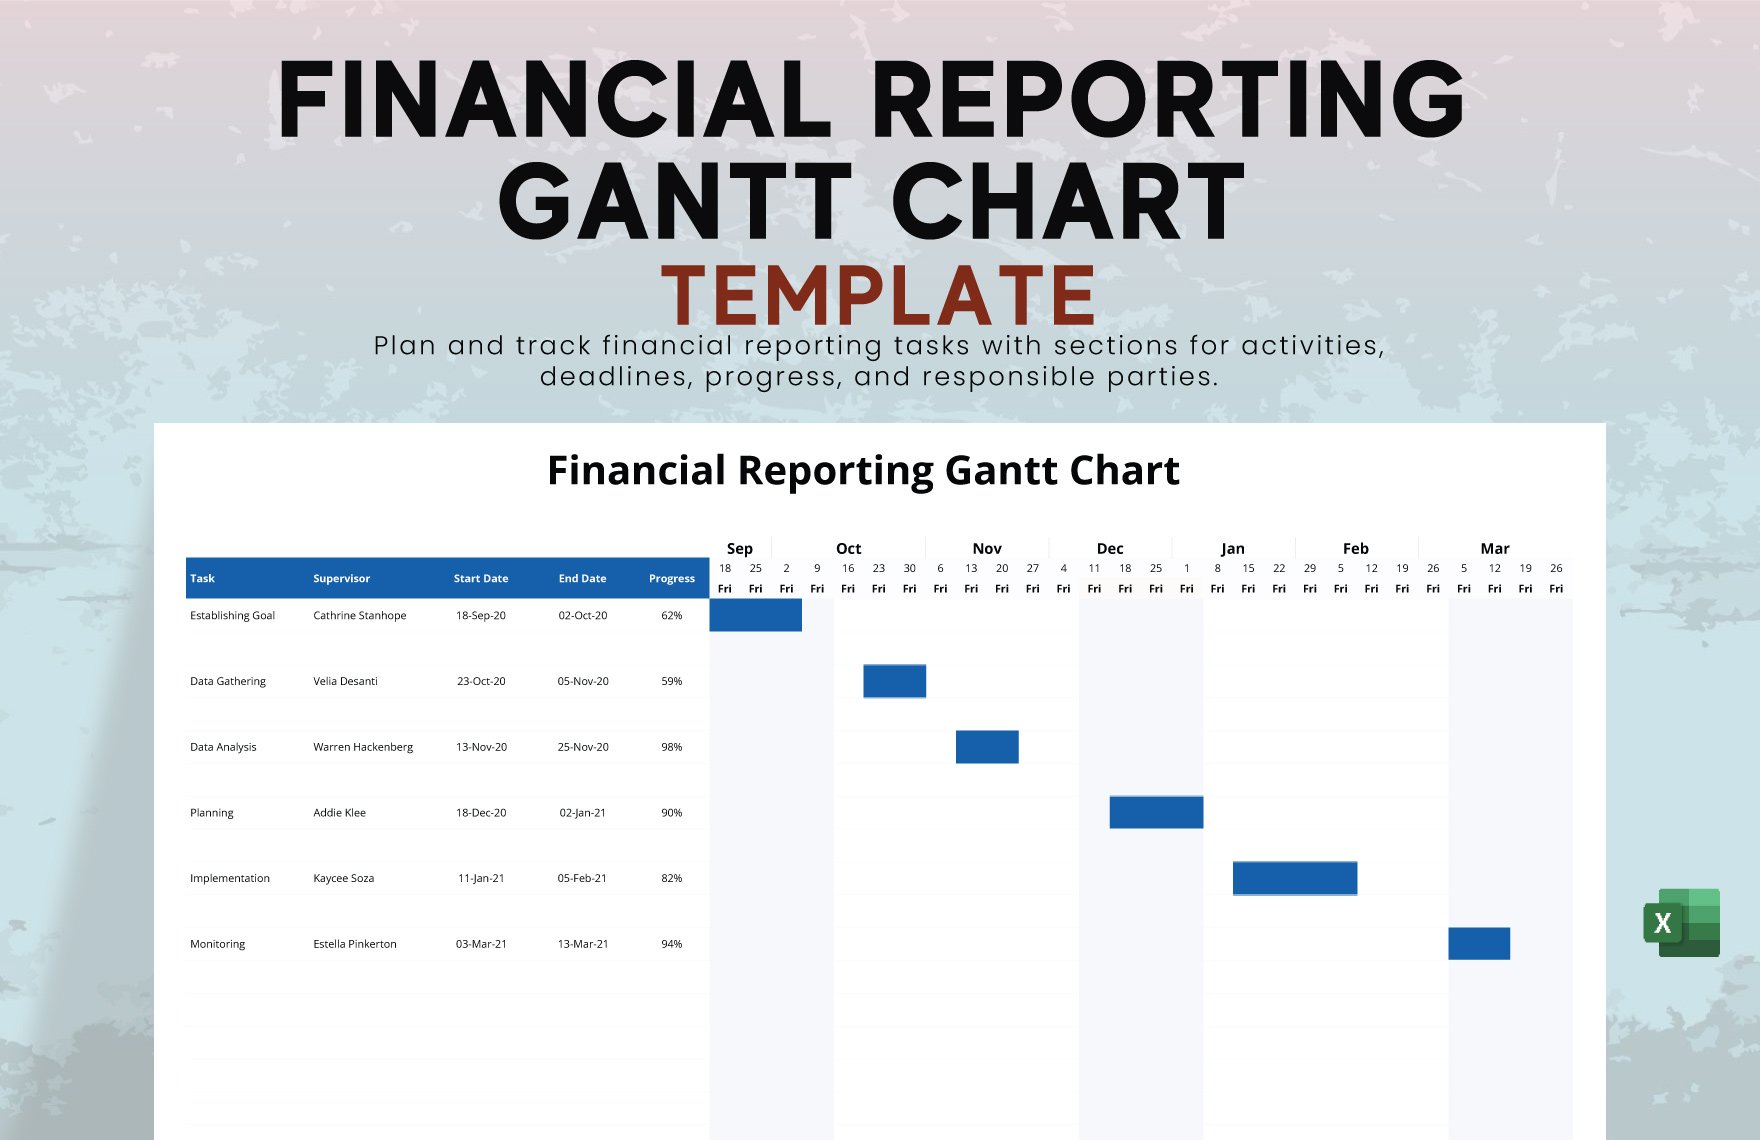 Financial Reporting Gantt Chart Template in Excel